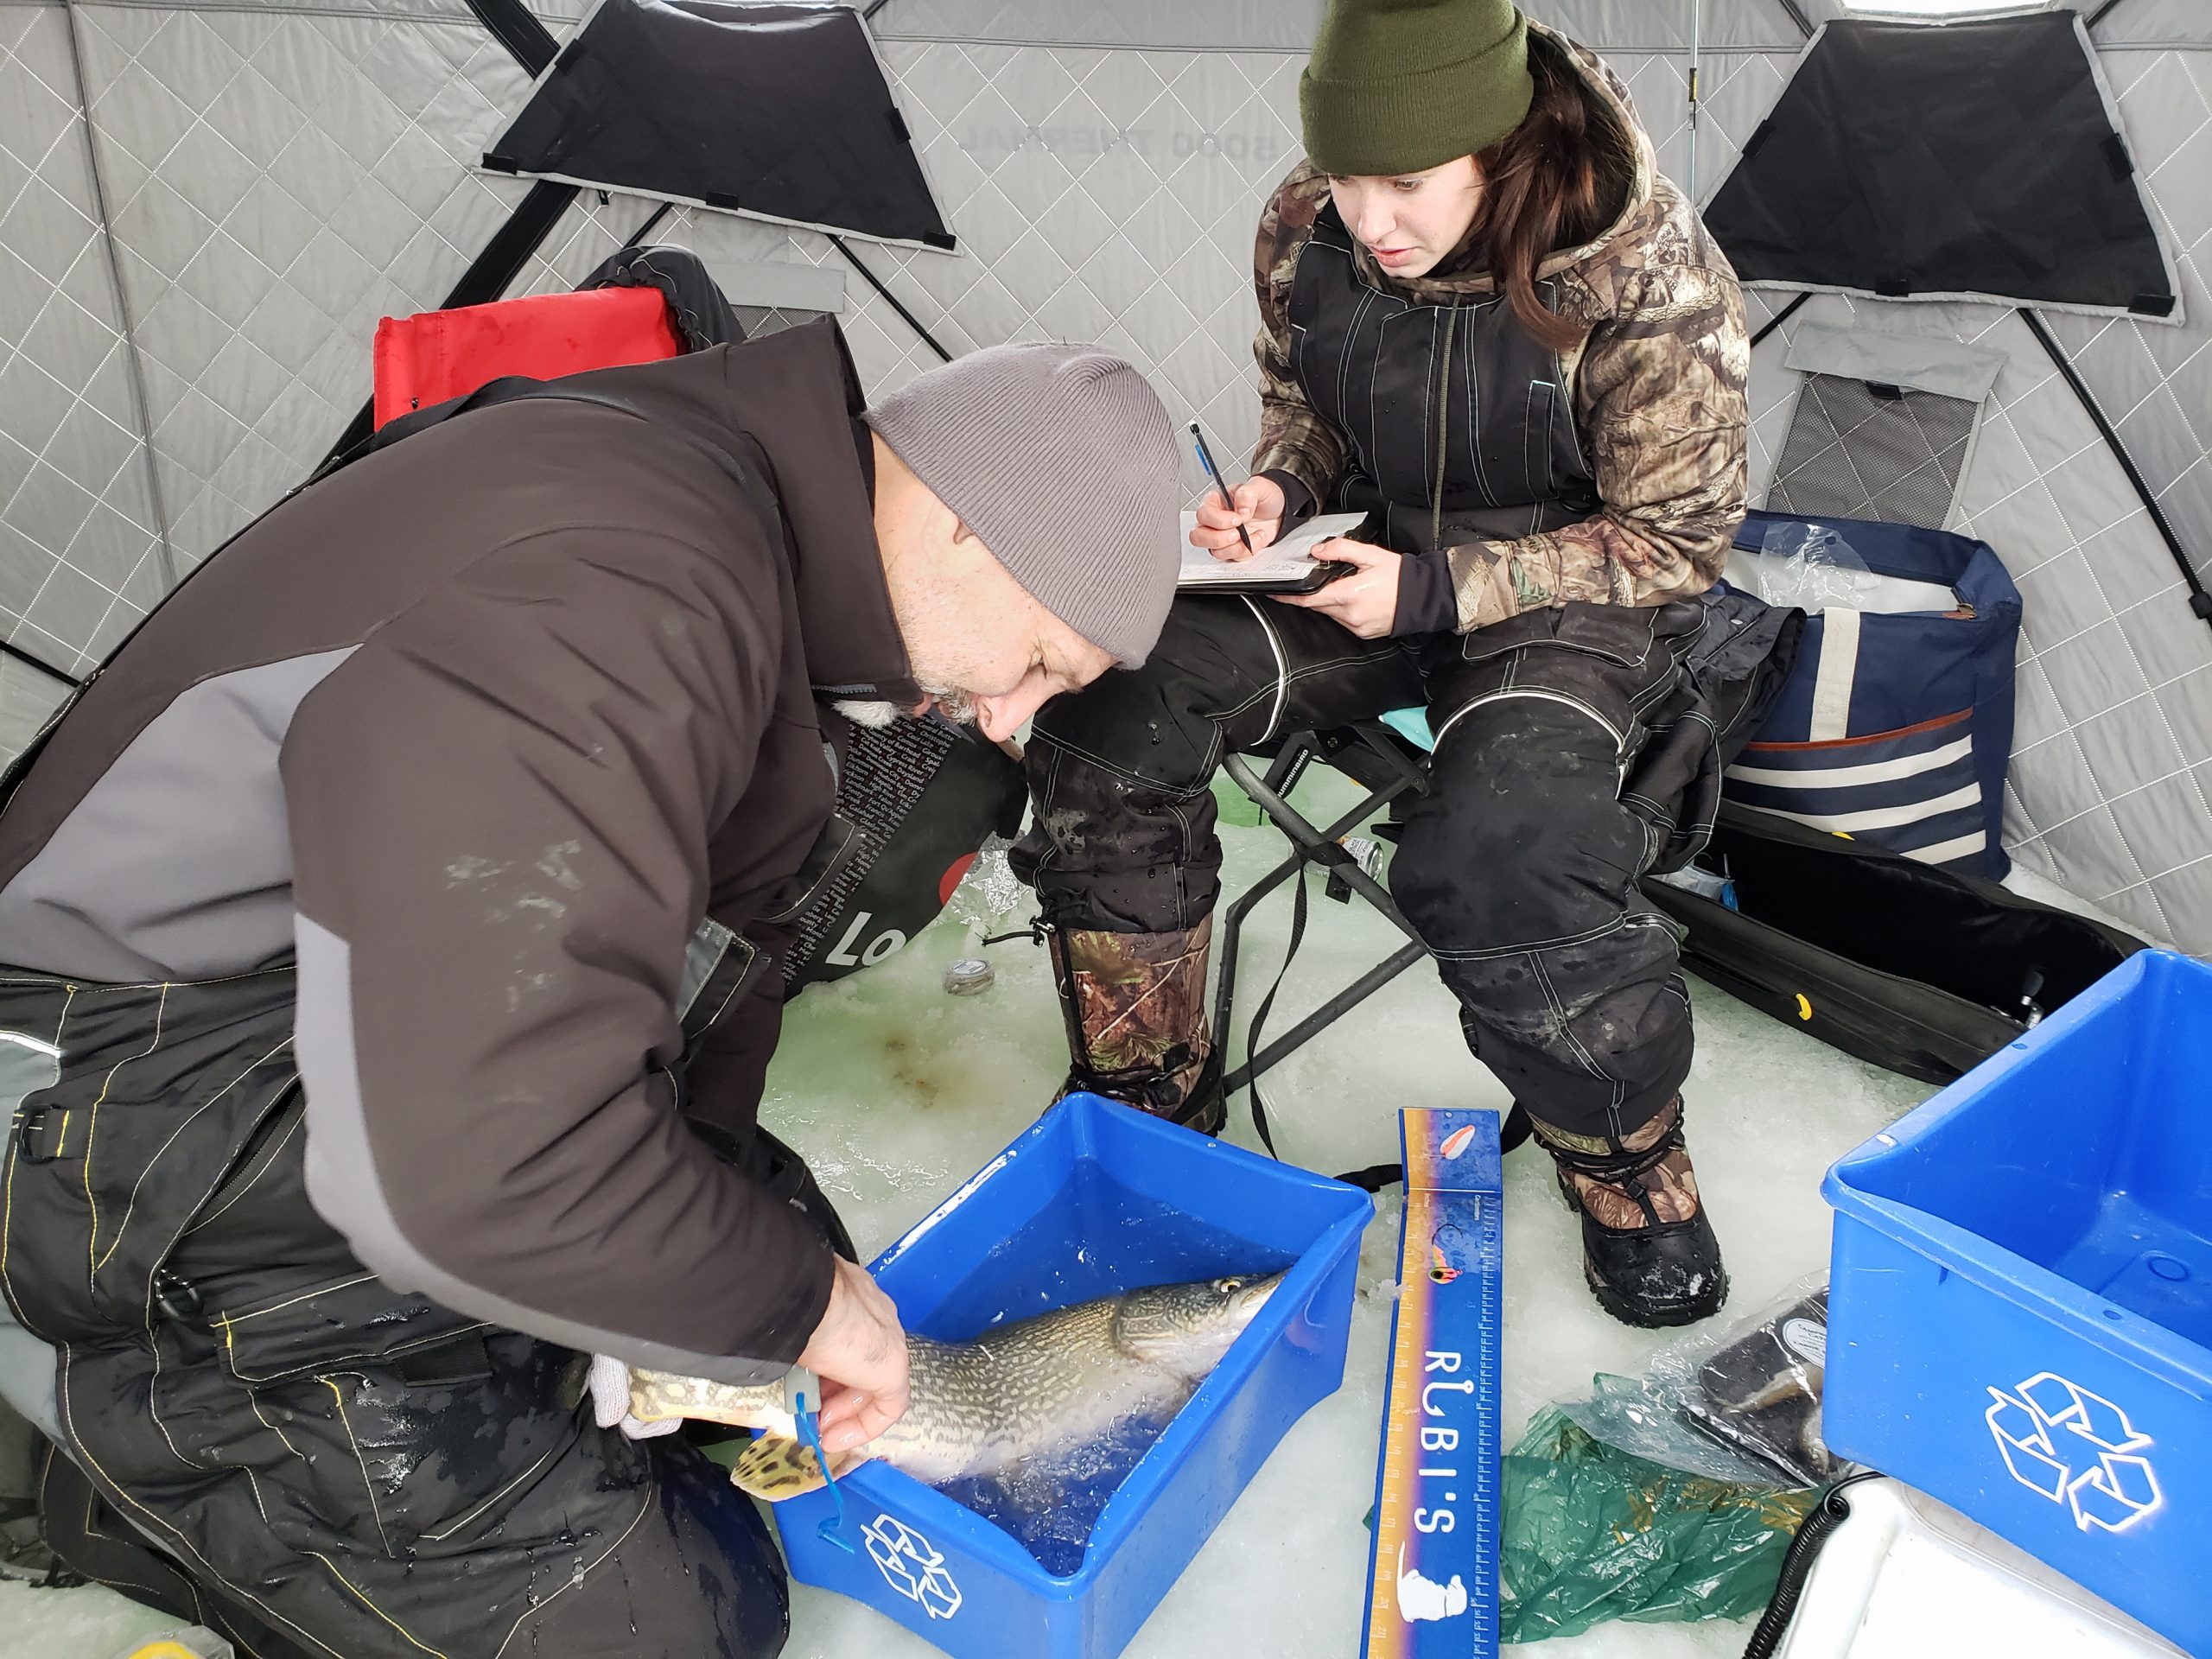 MyCatch, a new app that allows Saskatchewan anglers to share valuable fish data, is helping researchers like U of R biology professor Chris Somers (left) and graduate student Shayna Hamilton learn more about Saskatchewan fish stocks and the waterways they call home. (Photo courtesy of Chris Somers)